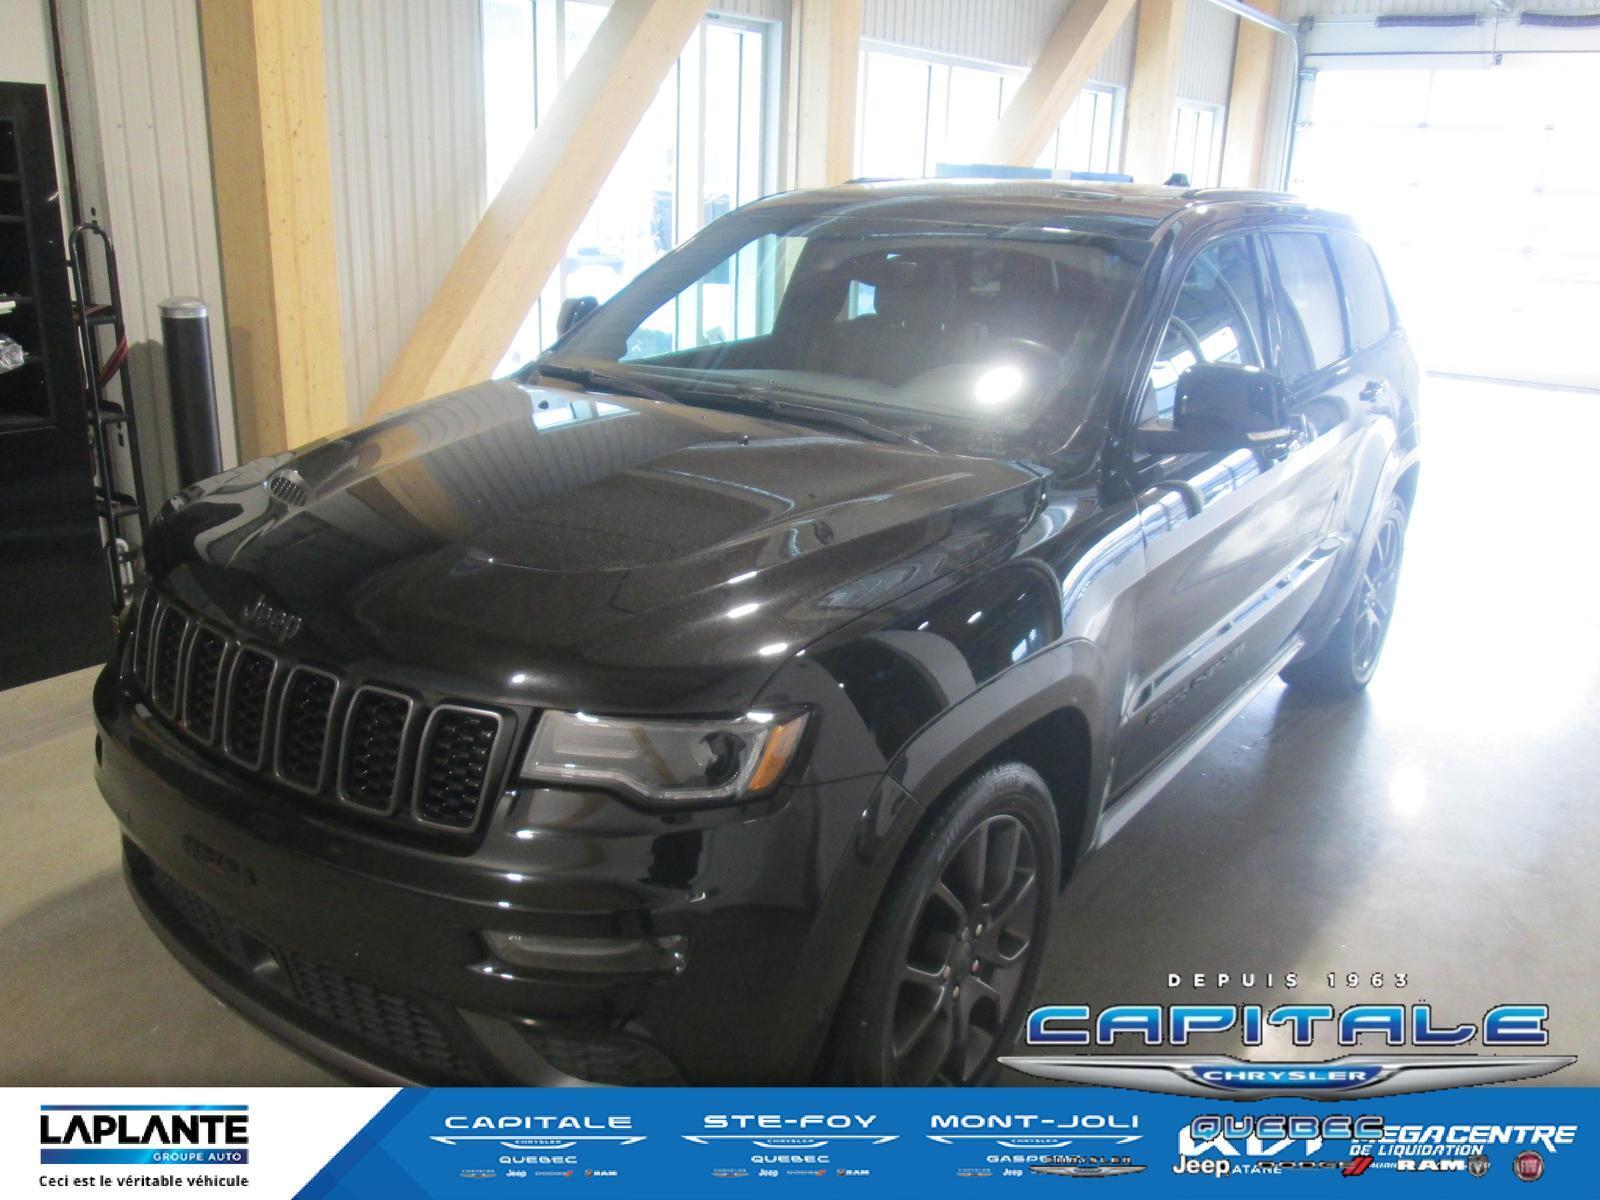 2021 Jeep Grand Cherokee Overland 4X4, Automatique, Moteur: 3.6L - 6 Cyl. -